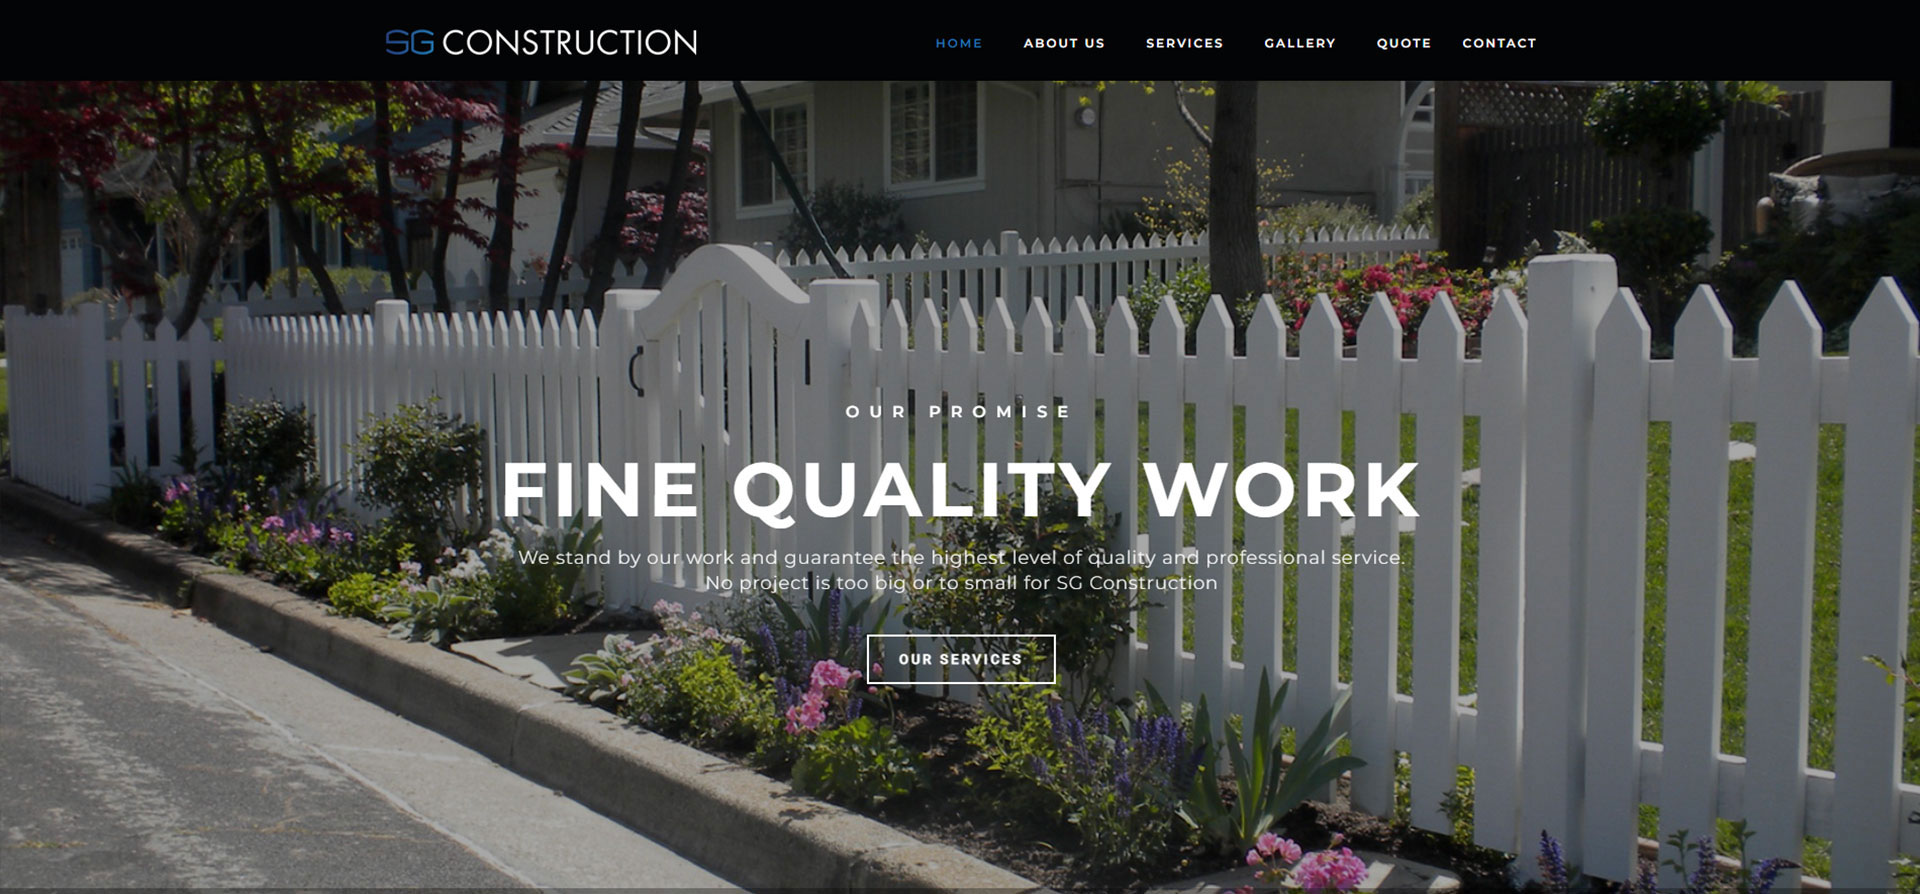 Quality work for all outdoor and wood structure projects.